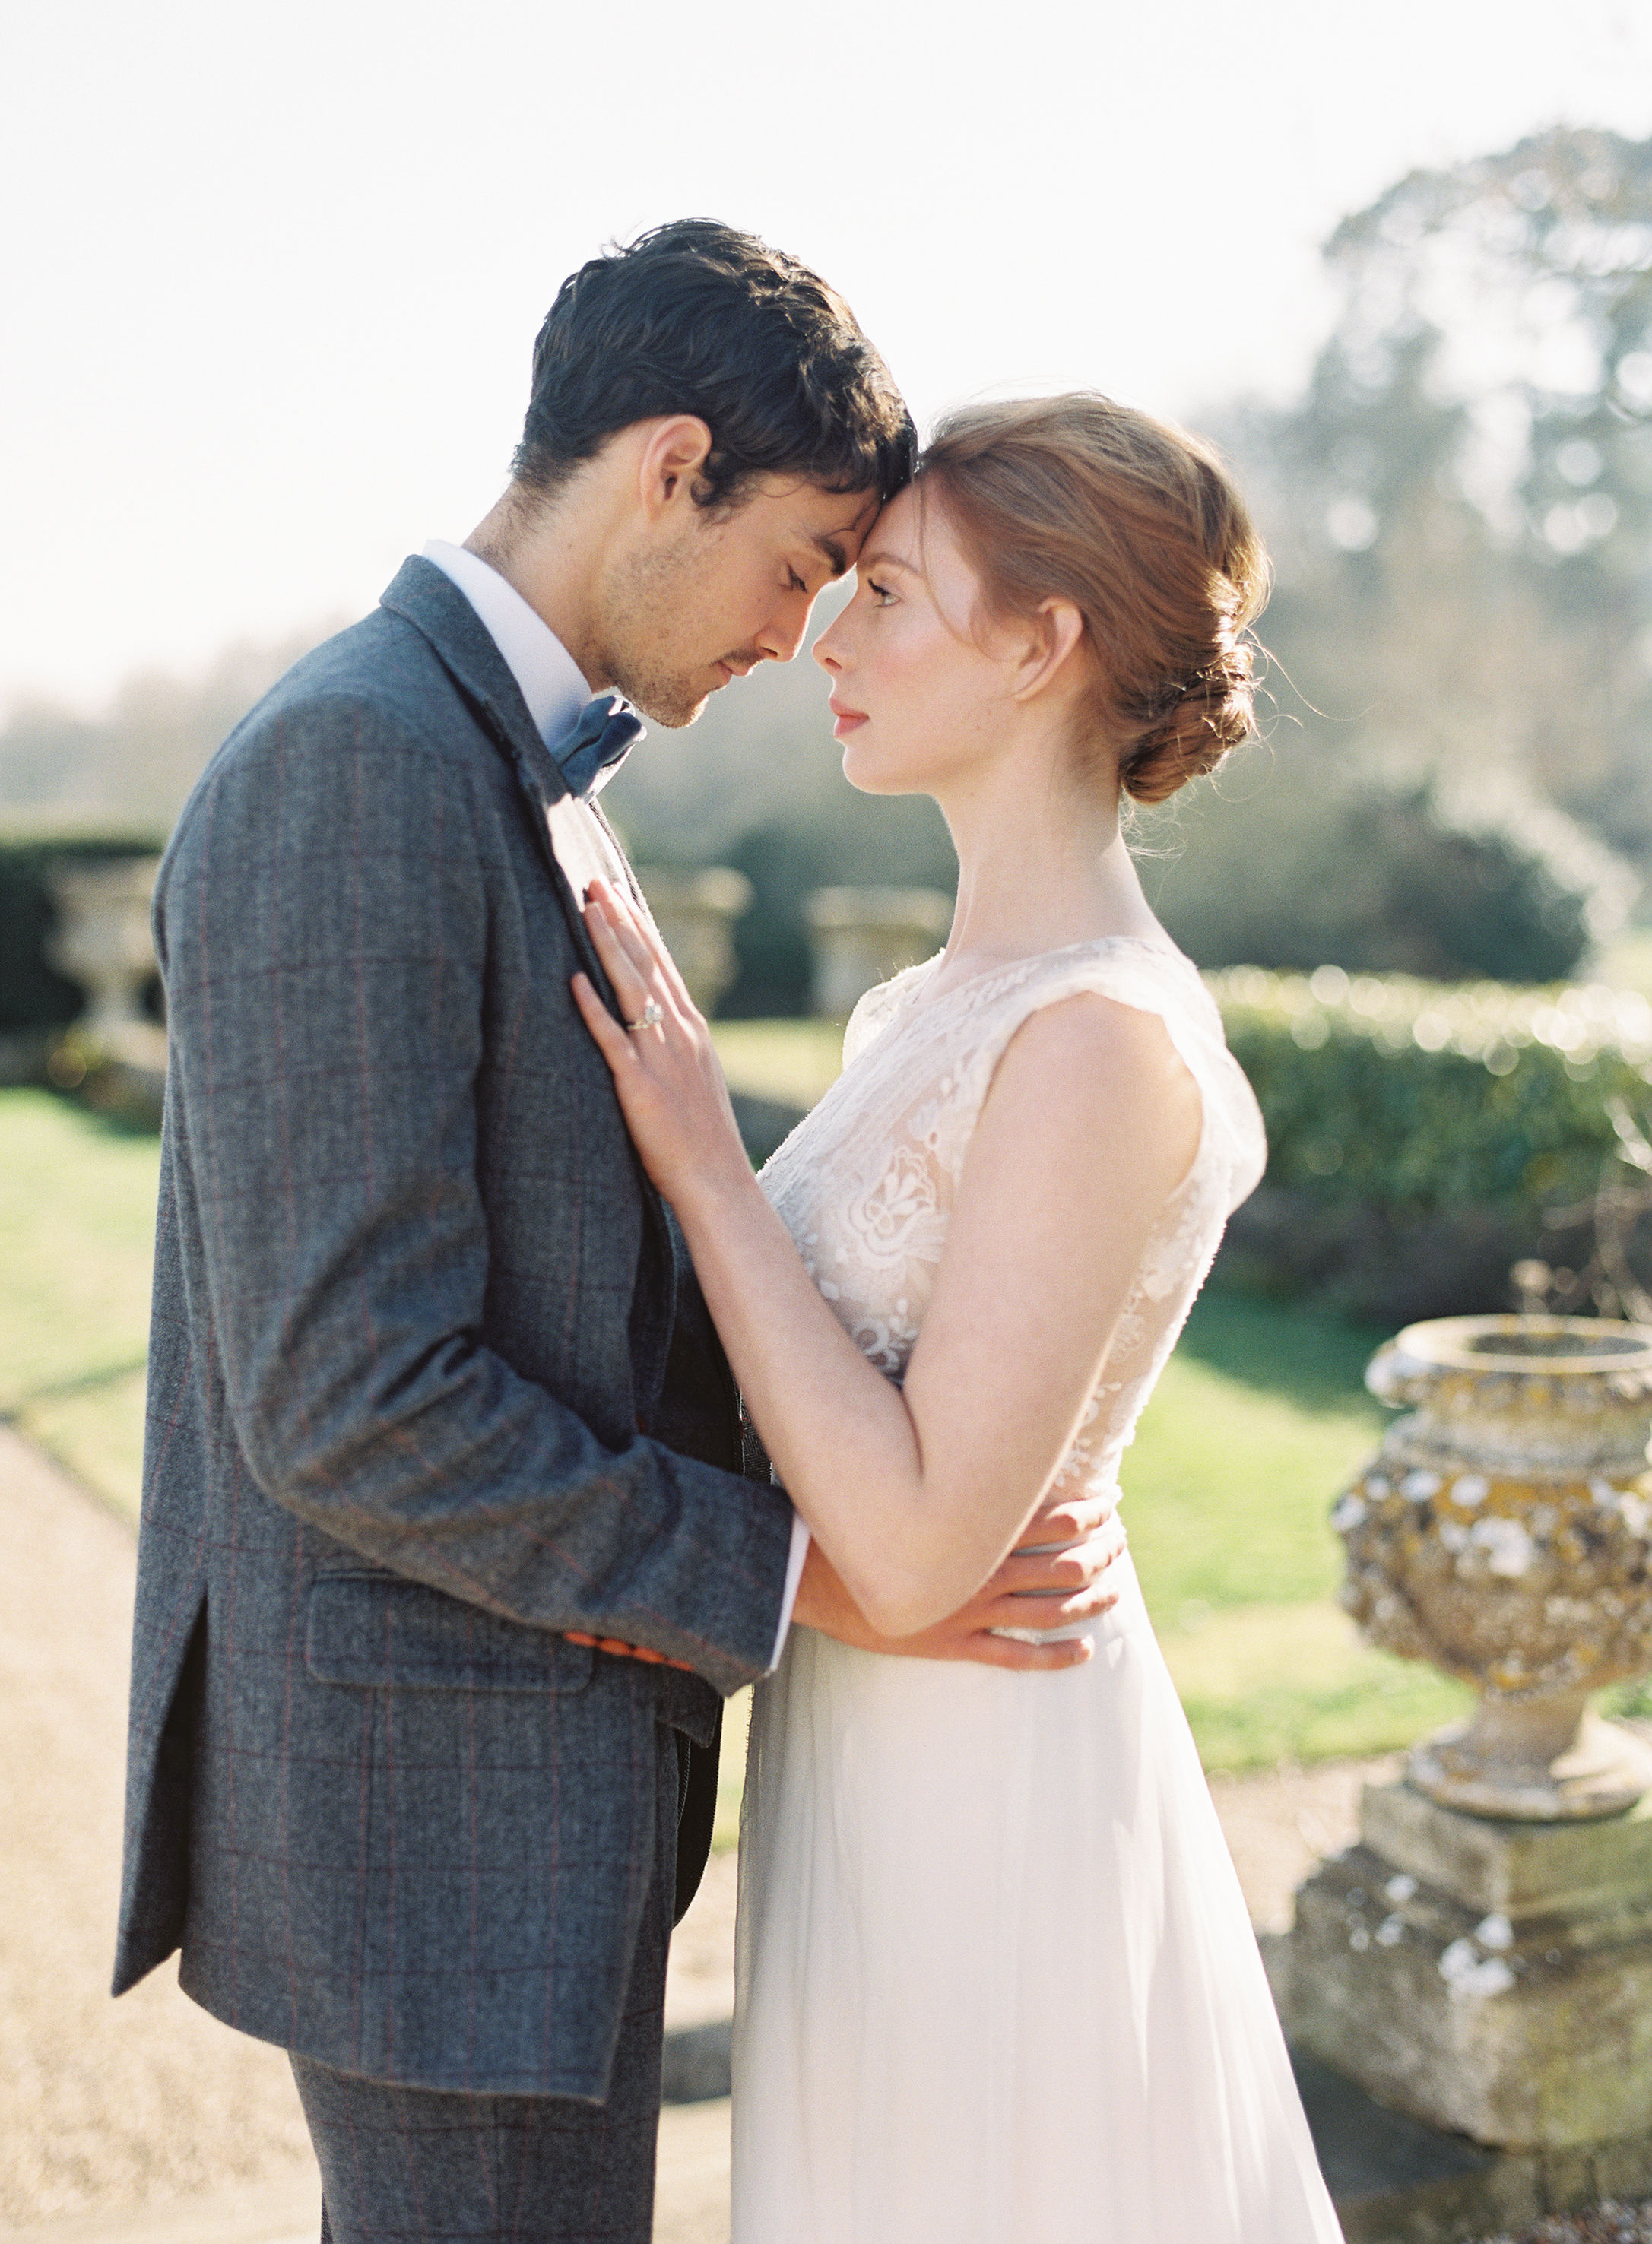 Romantic couple portrait at Somerley House featured on Wedding Sparrow. Photo by Camilla Arnhold